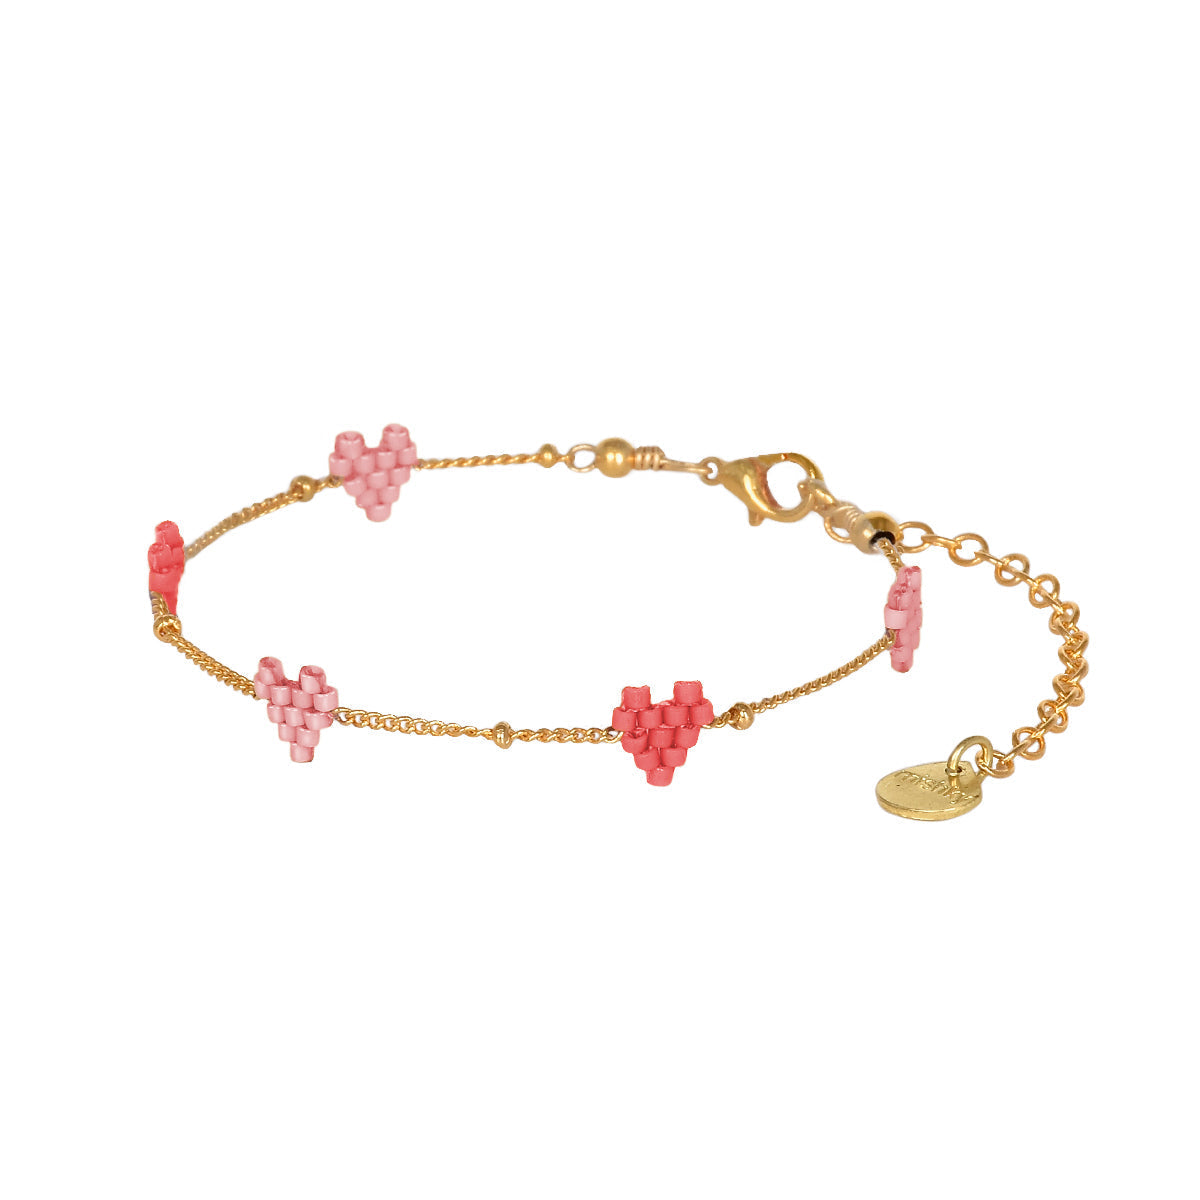 Heartsy Chain gold plated adjustable bracelet 12176